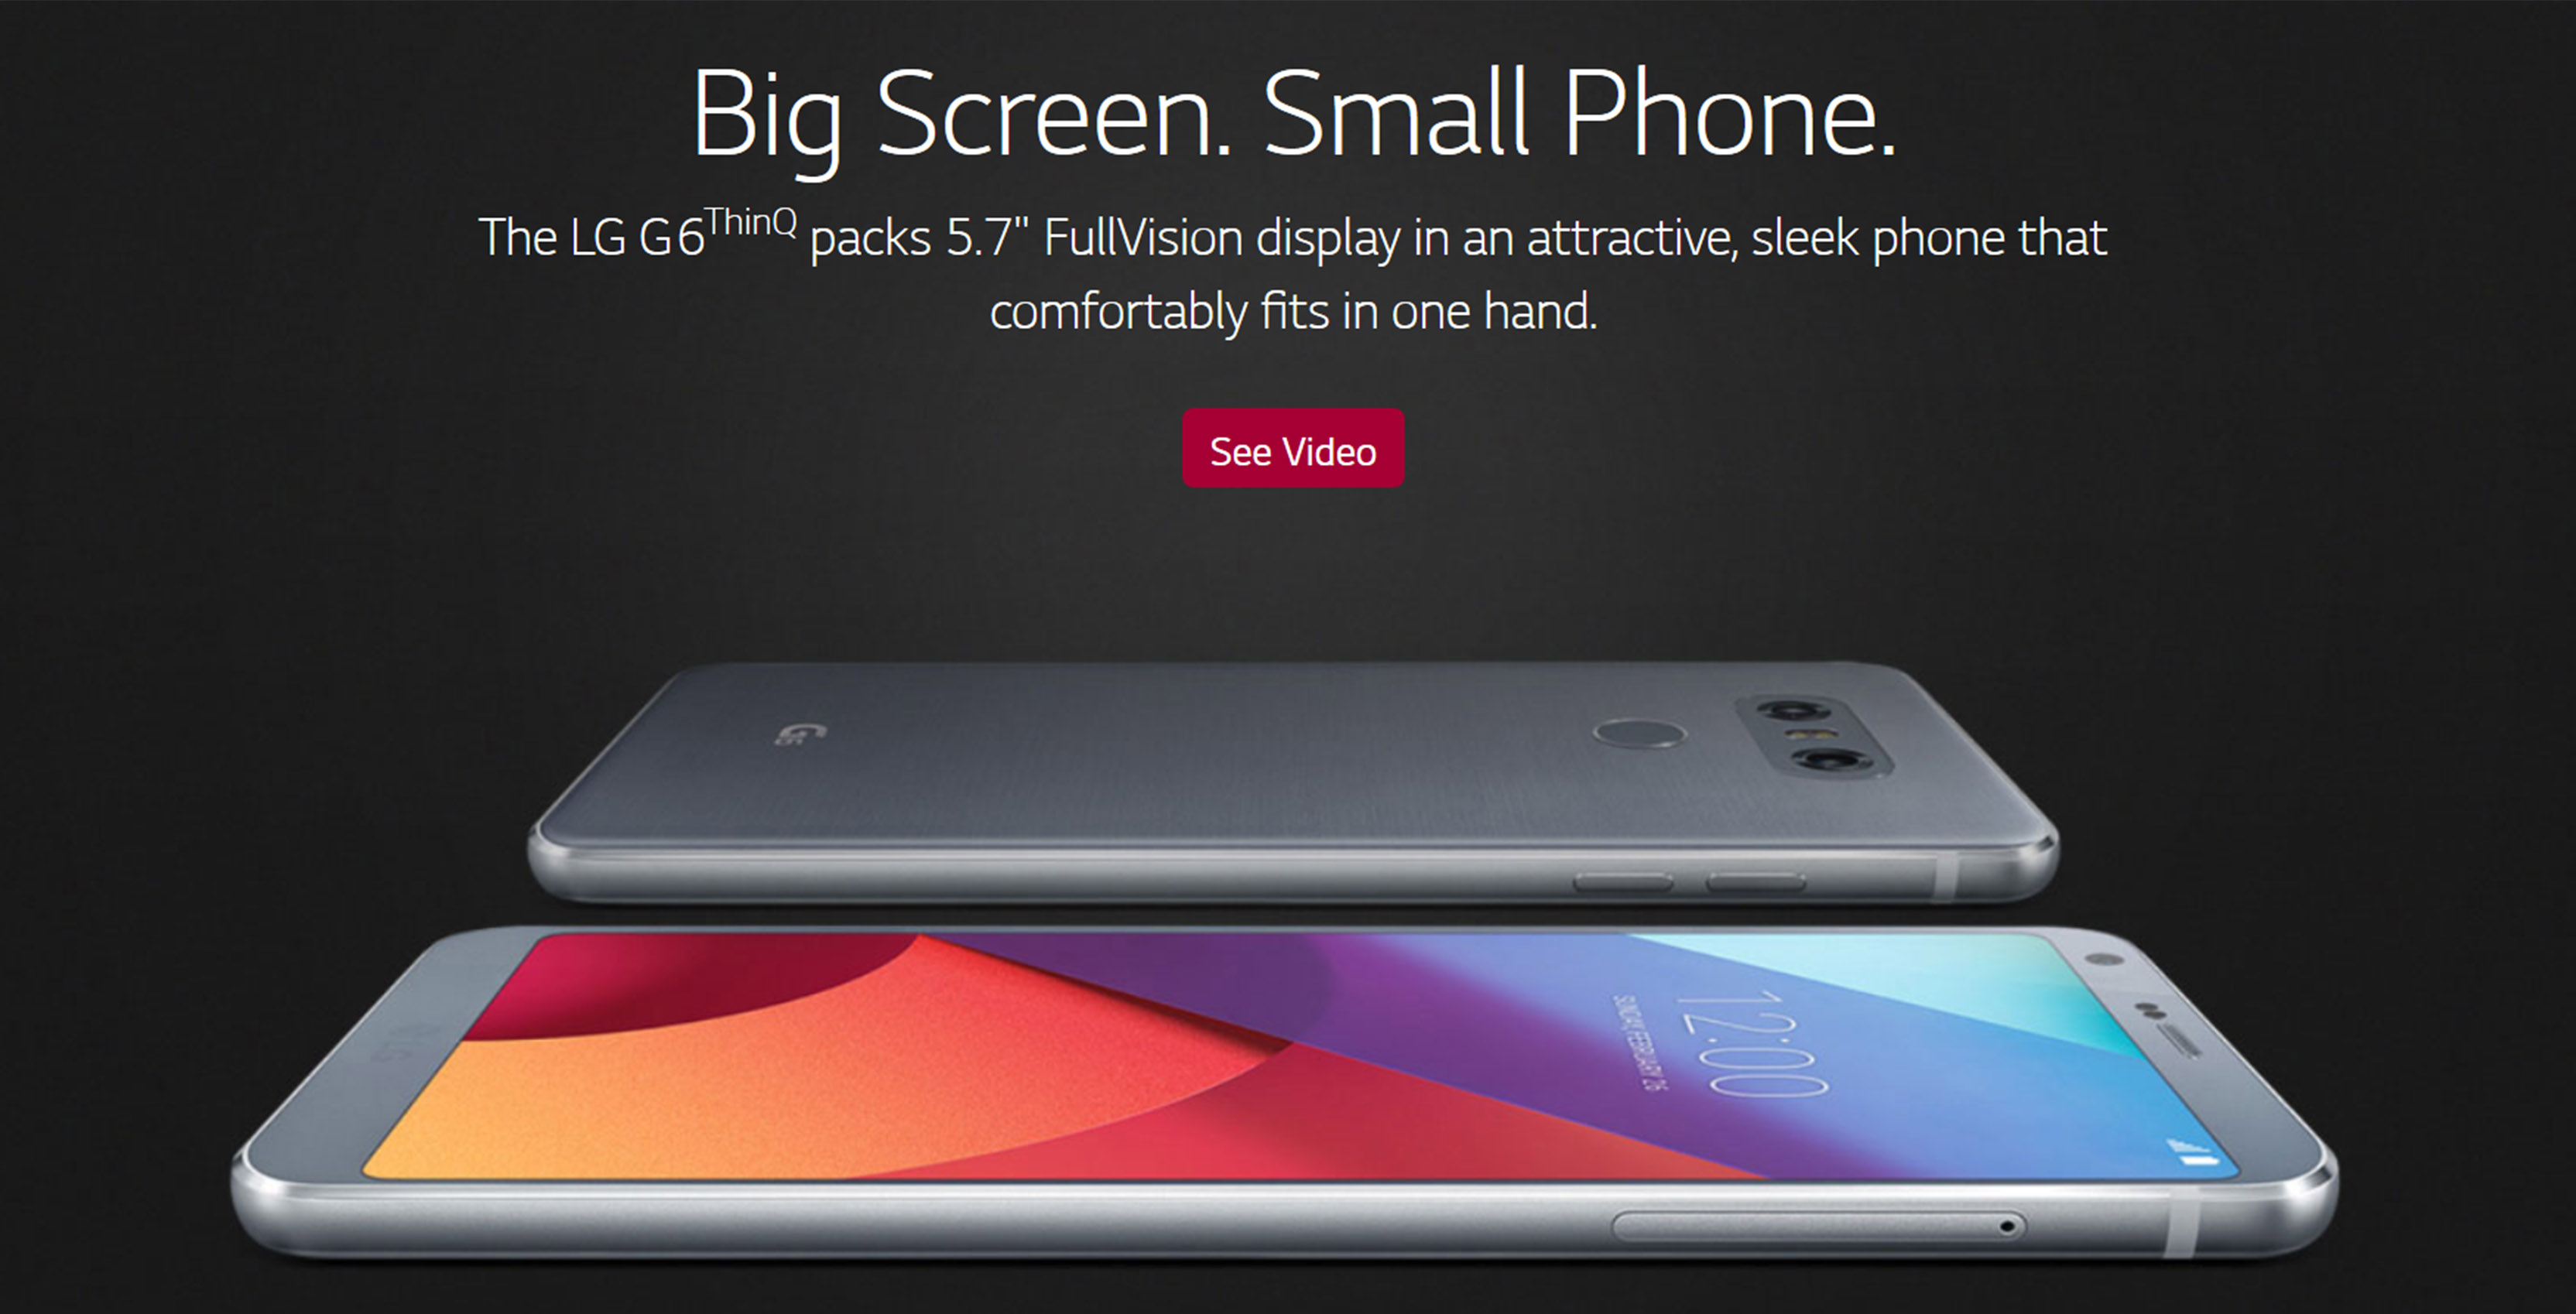 LG website showing the LG G6 ThinQ